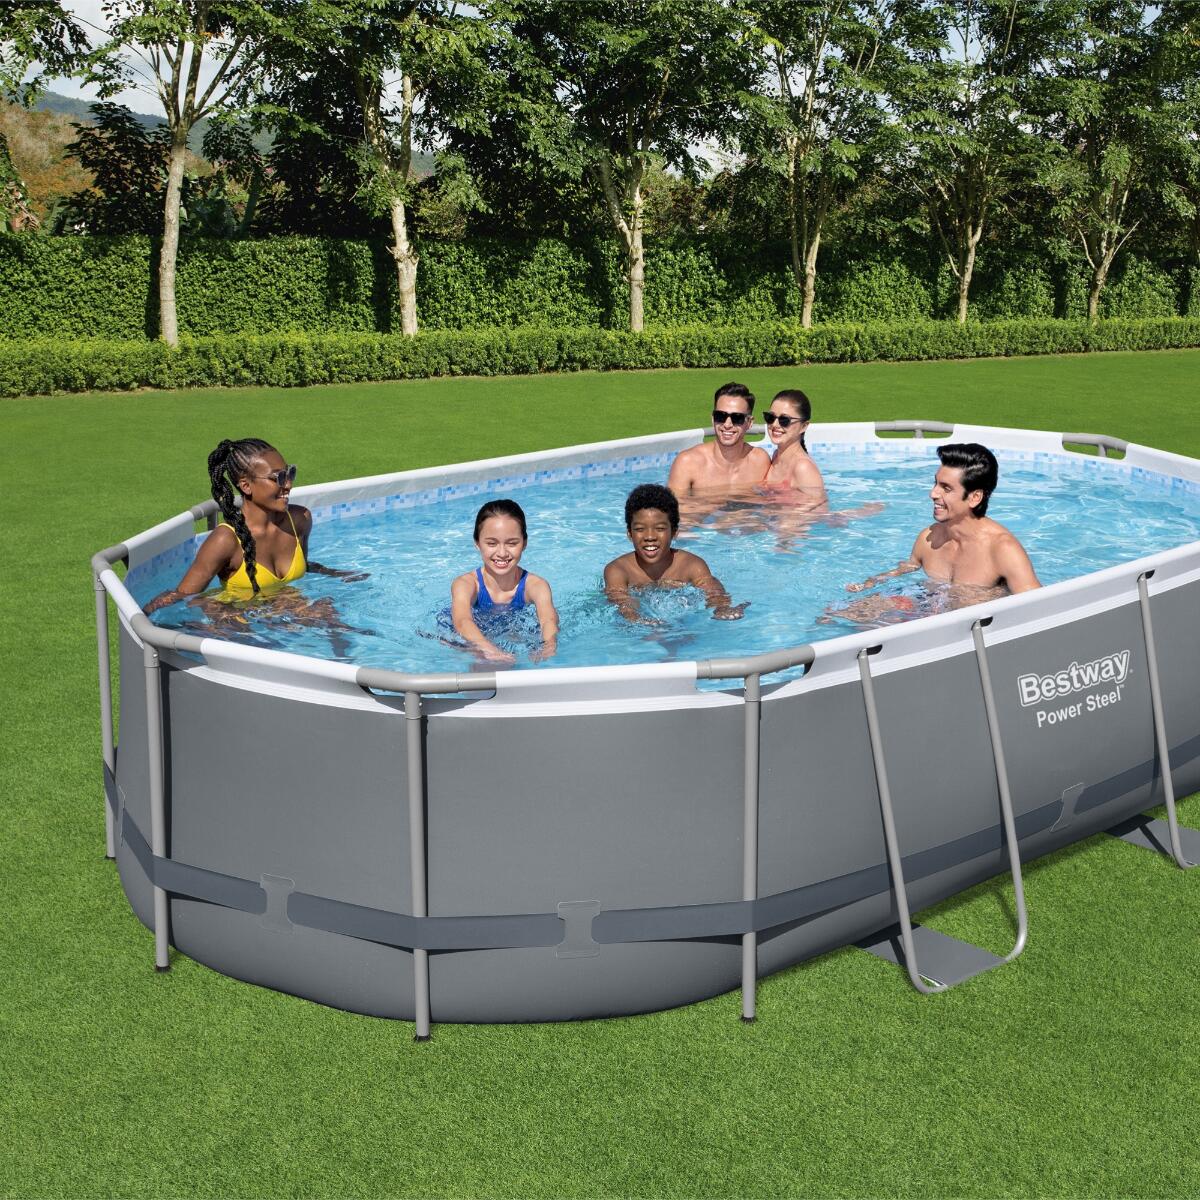 Bestway 16ft x 10ft x 42" Oval Power Steel Above Ground Pool 2/7